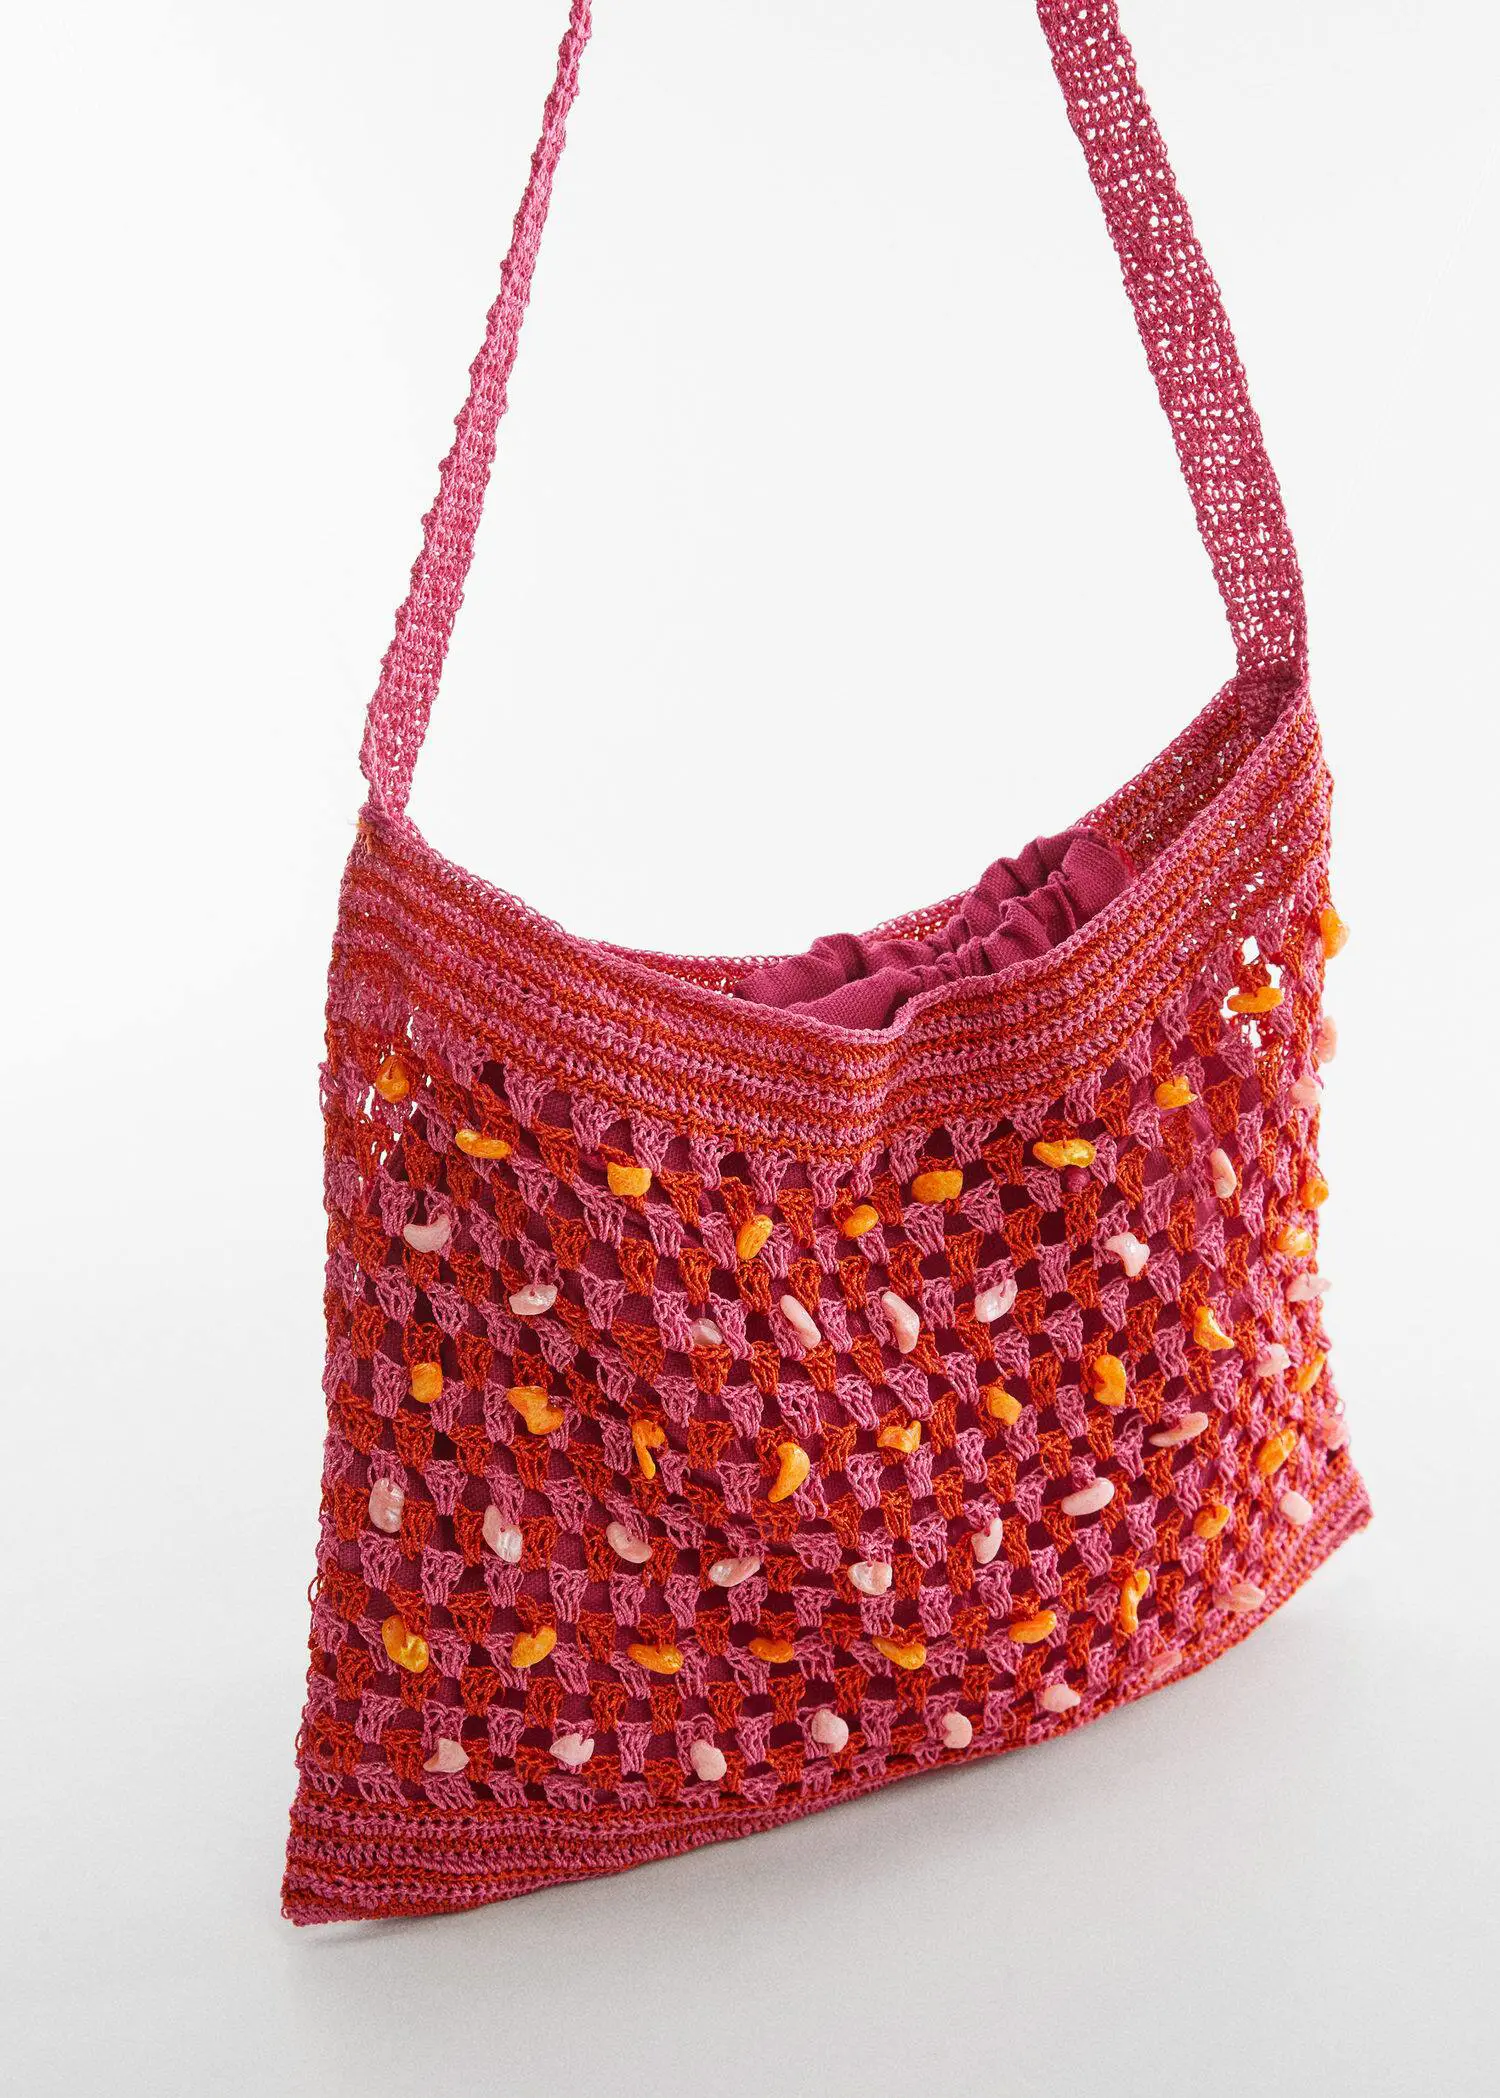 Mango Crochet bag with shell detail. a crocheted bag is shown on top of a table. 